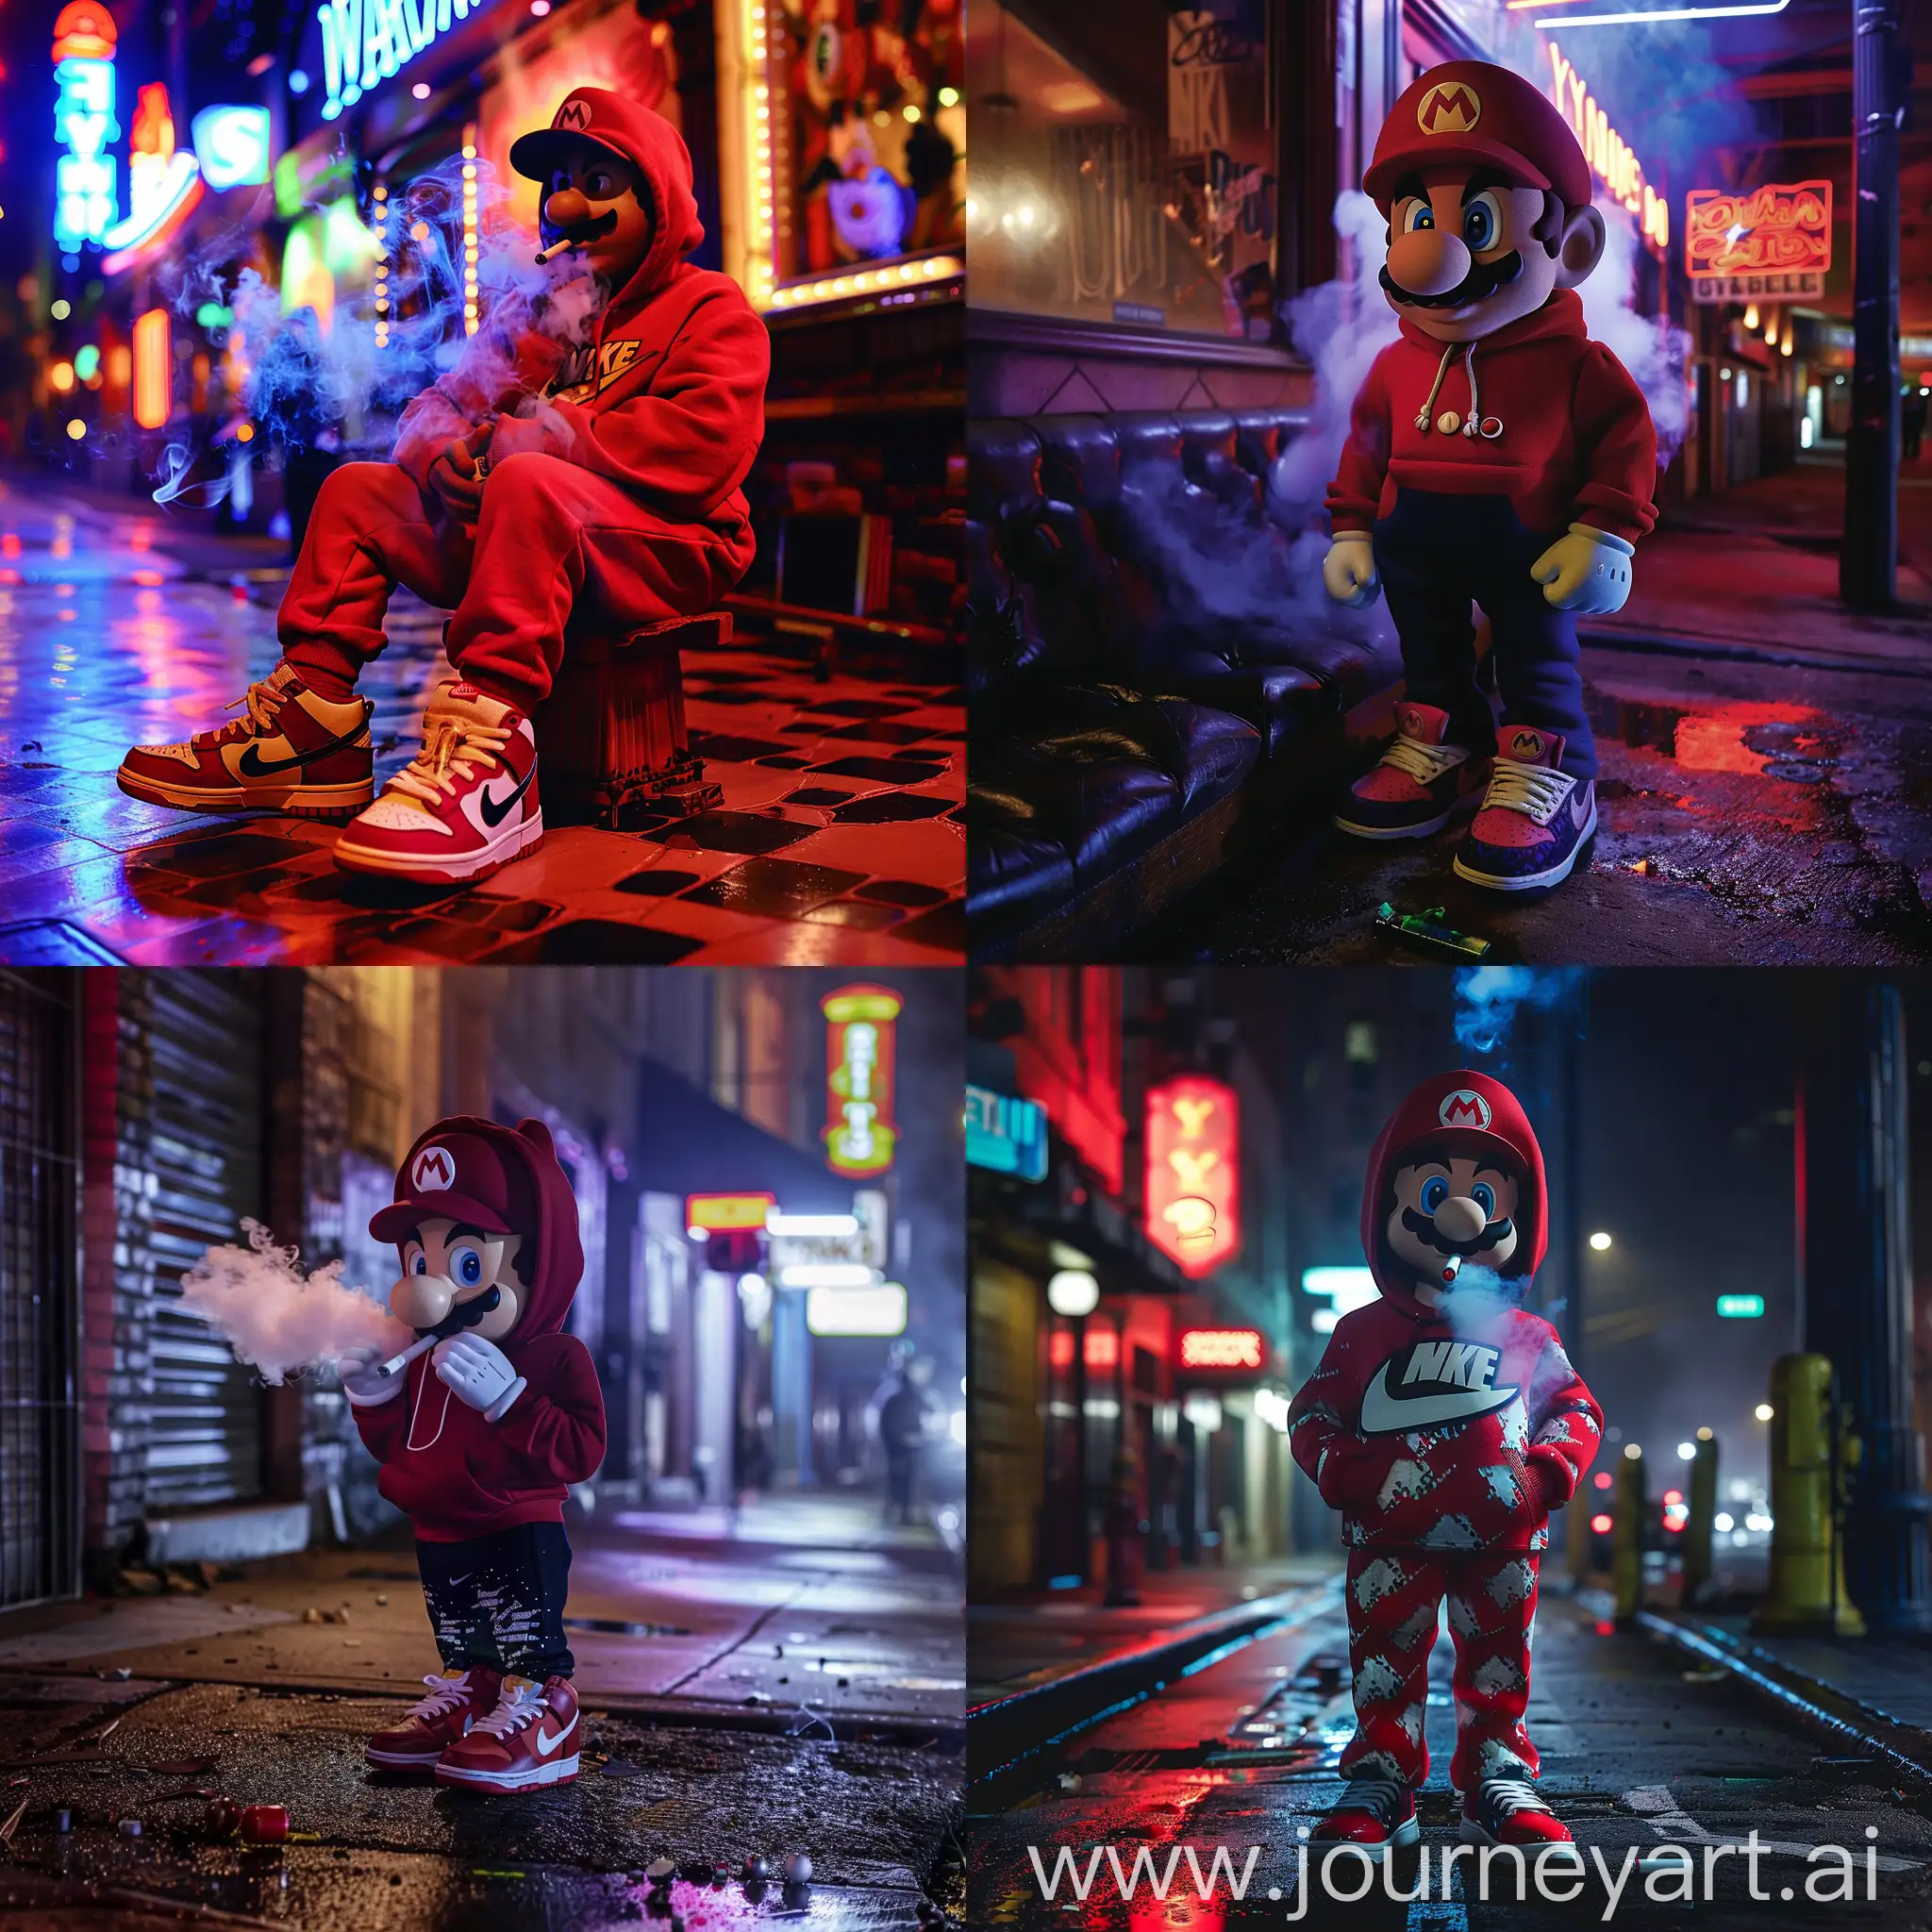 Mario-Smoking-in-Ybor-City-Club-with-Nike-Hoodie-and-Shoes